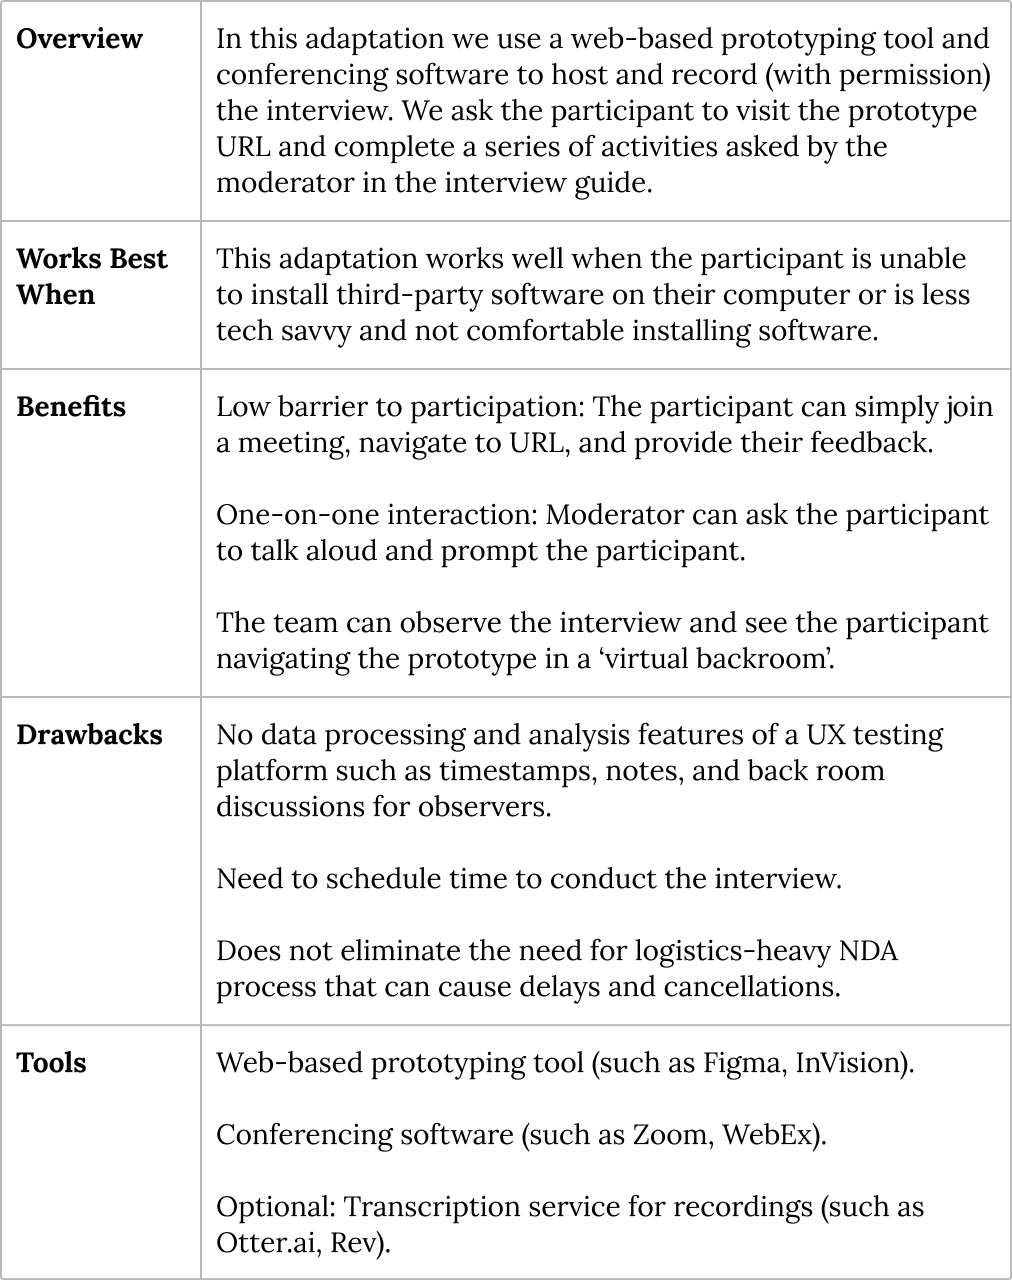 A table with overview of adaptive usability testing method. When it works best, benefits, drawbacks, and tools needed.